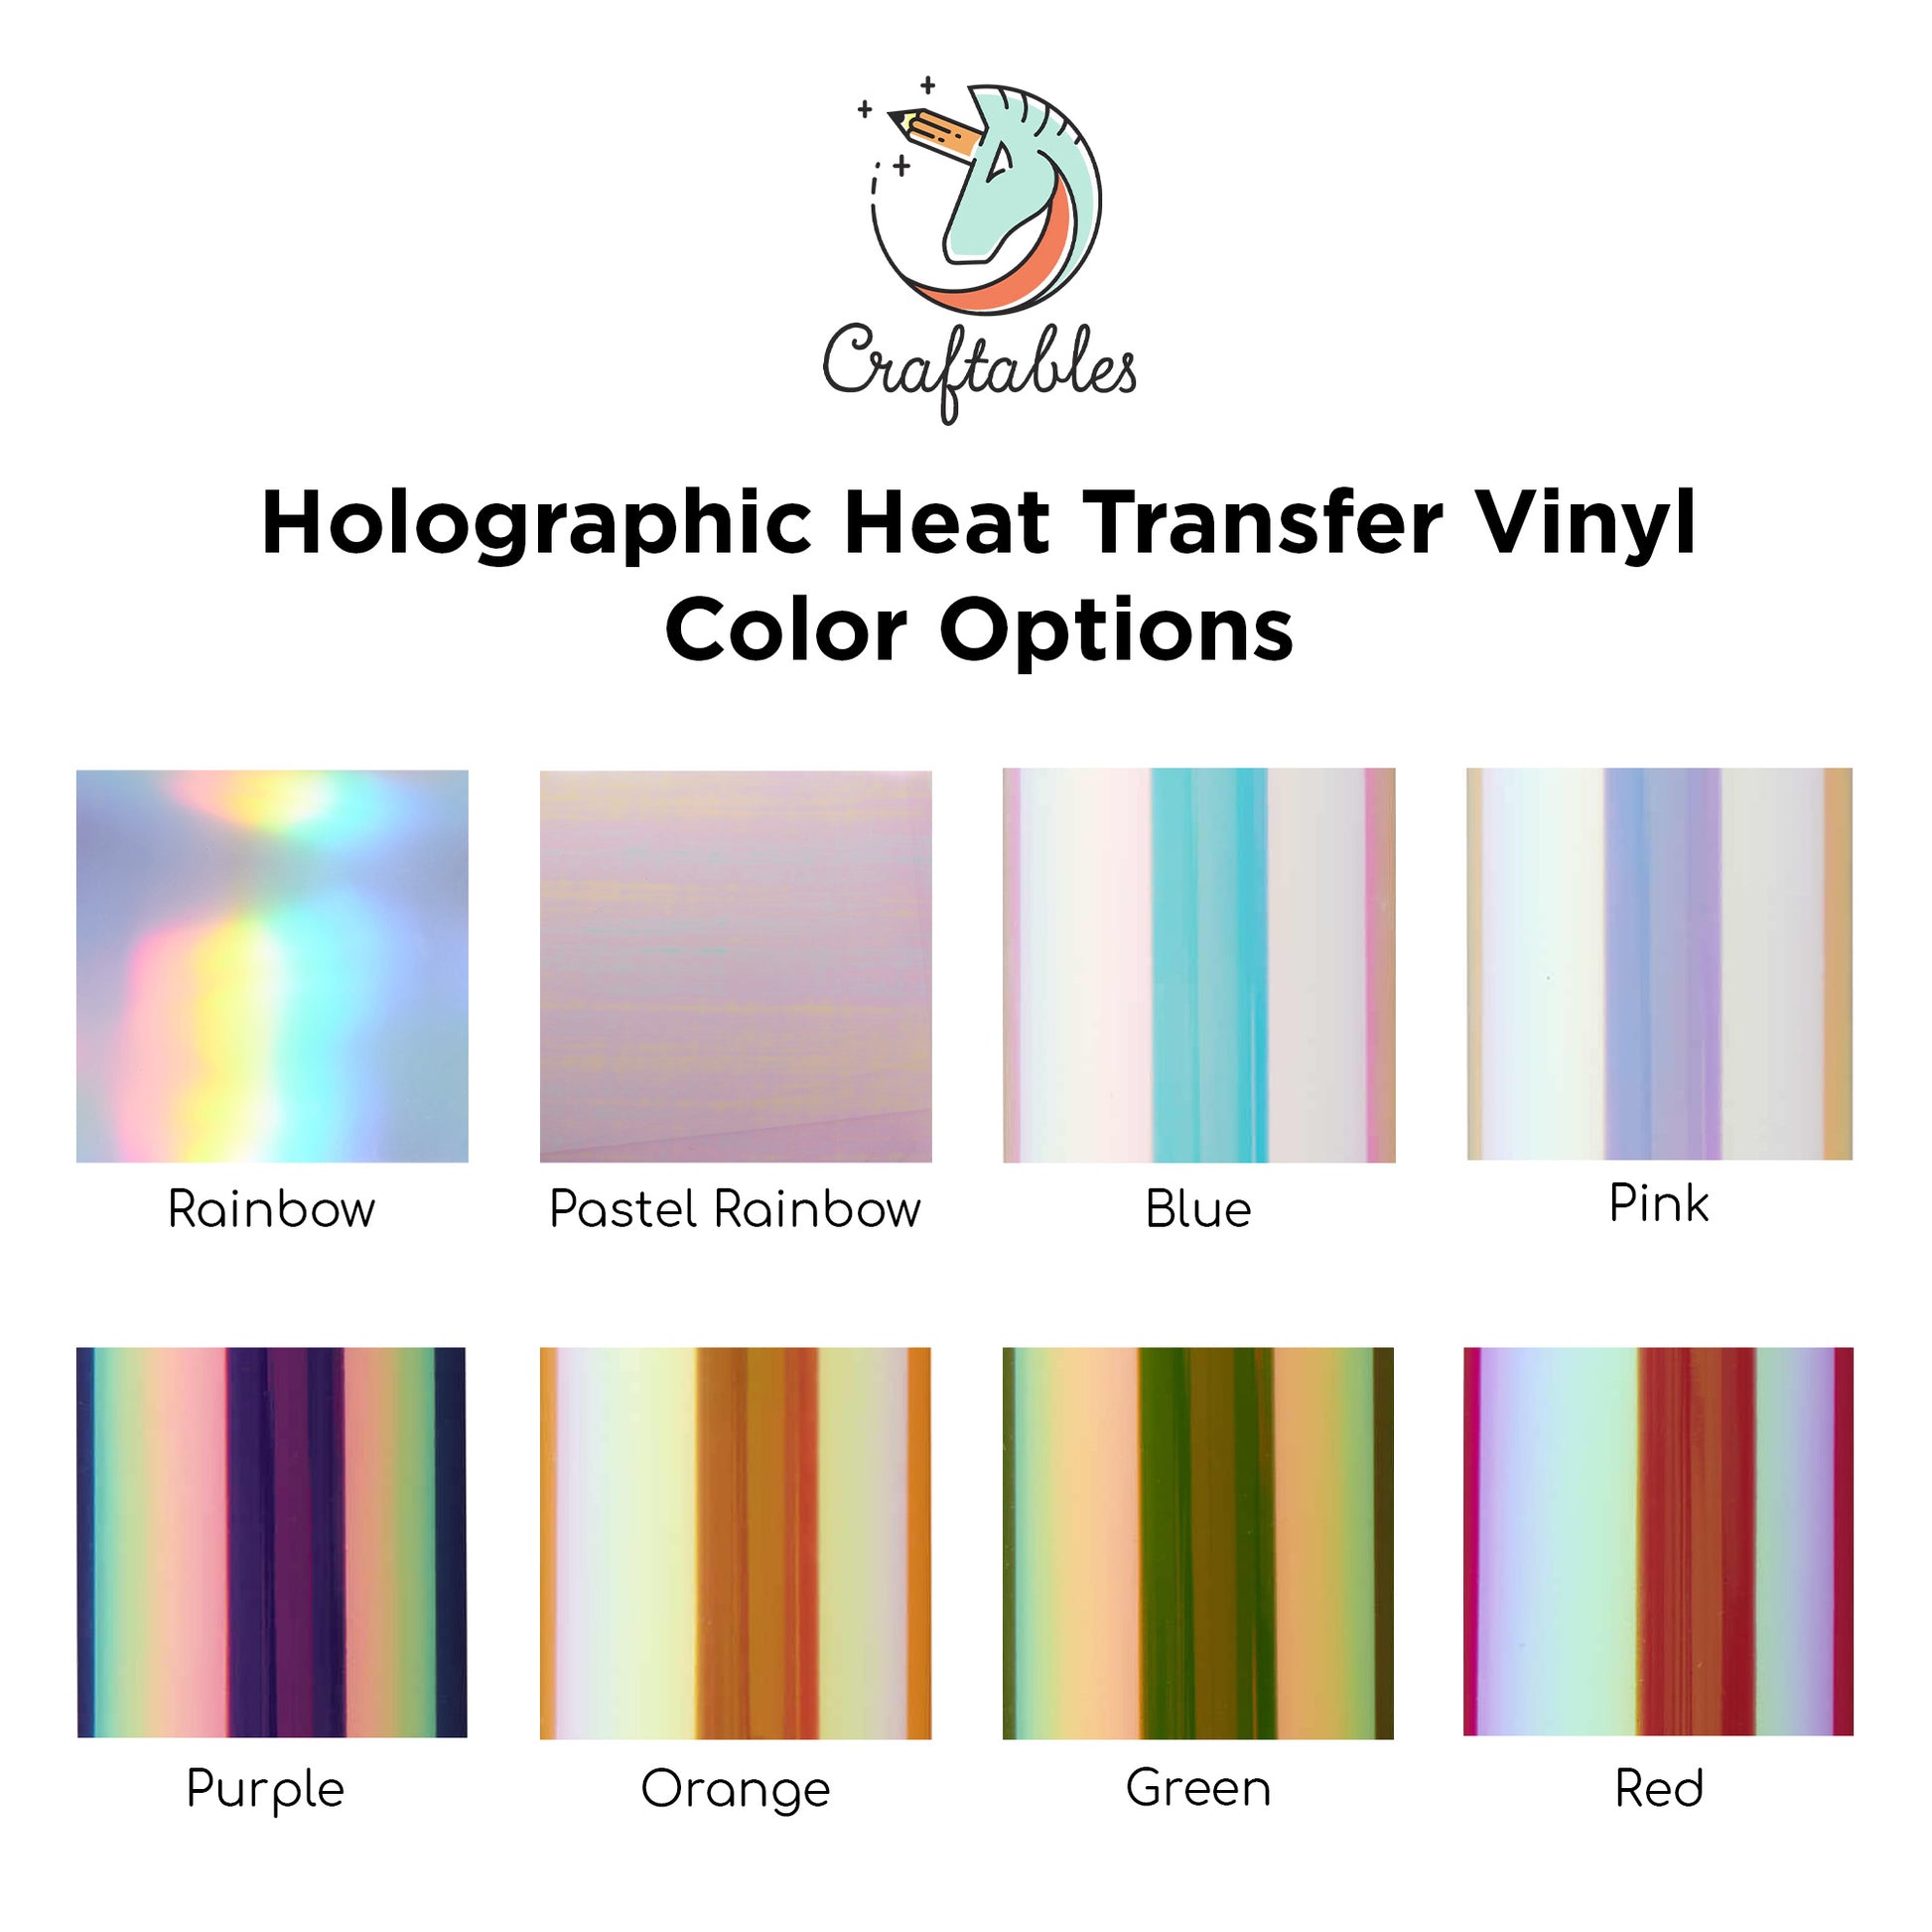 Orange Holographic Iridescent Heat Transfer Vinyl Sheets By Craftables